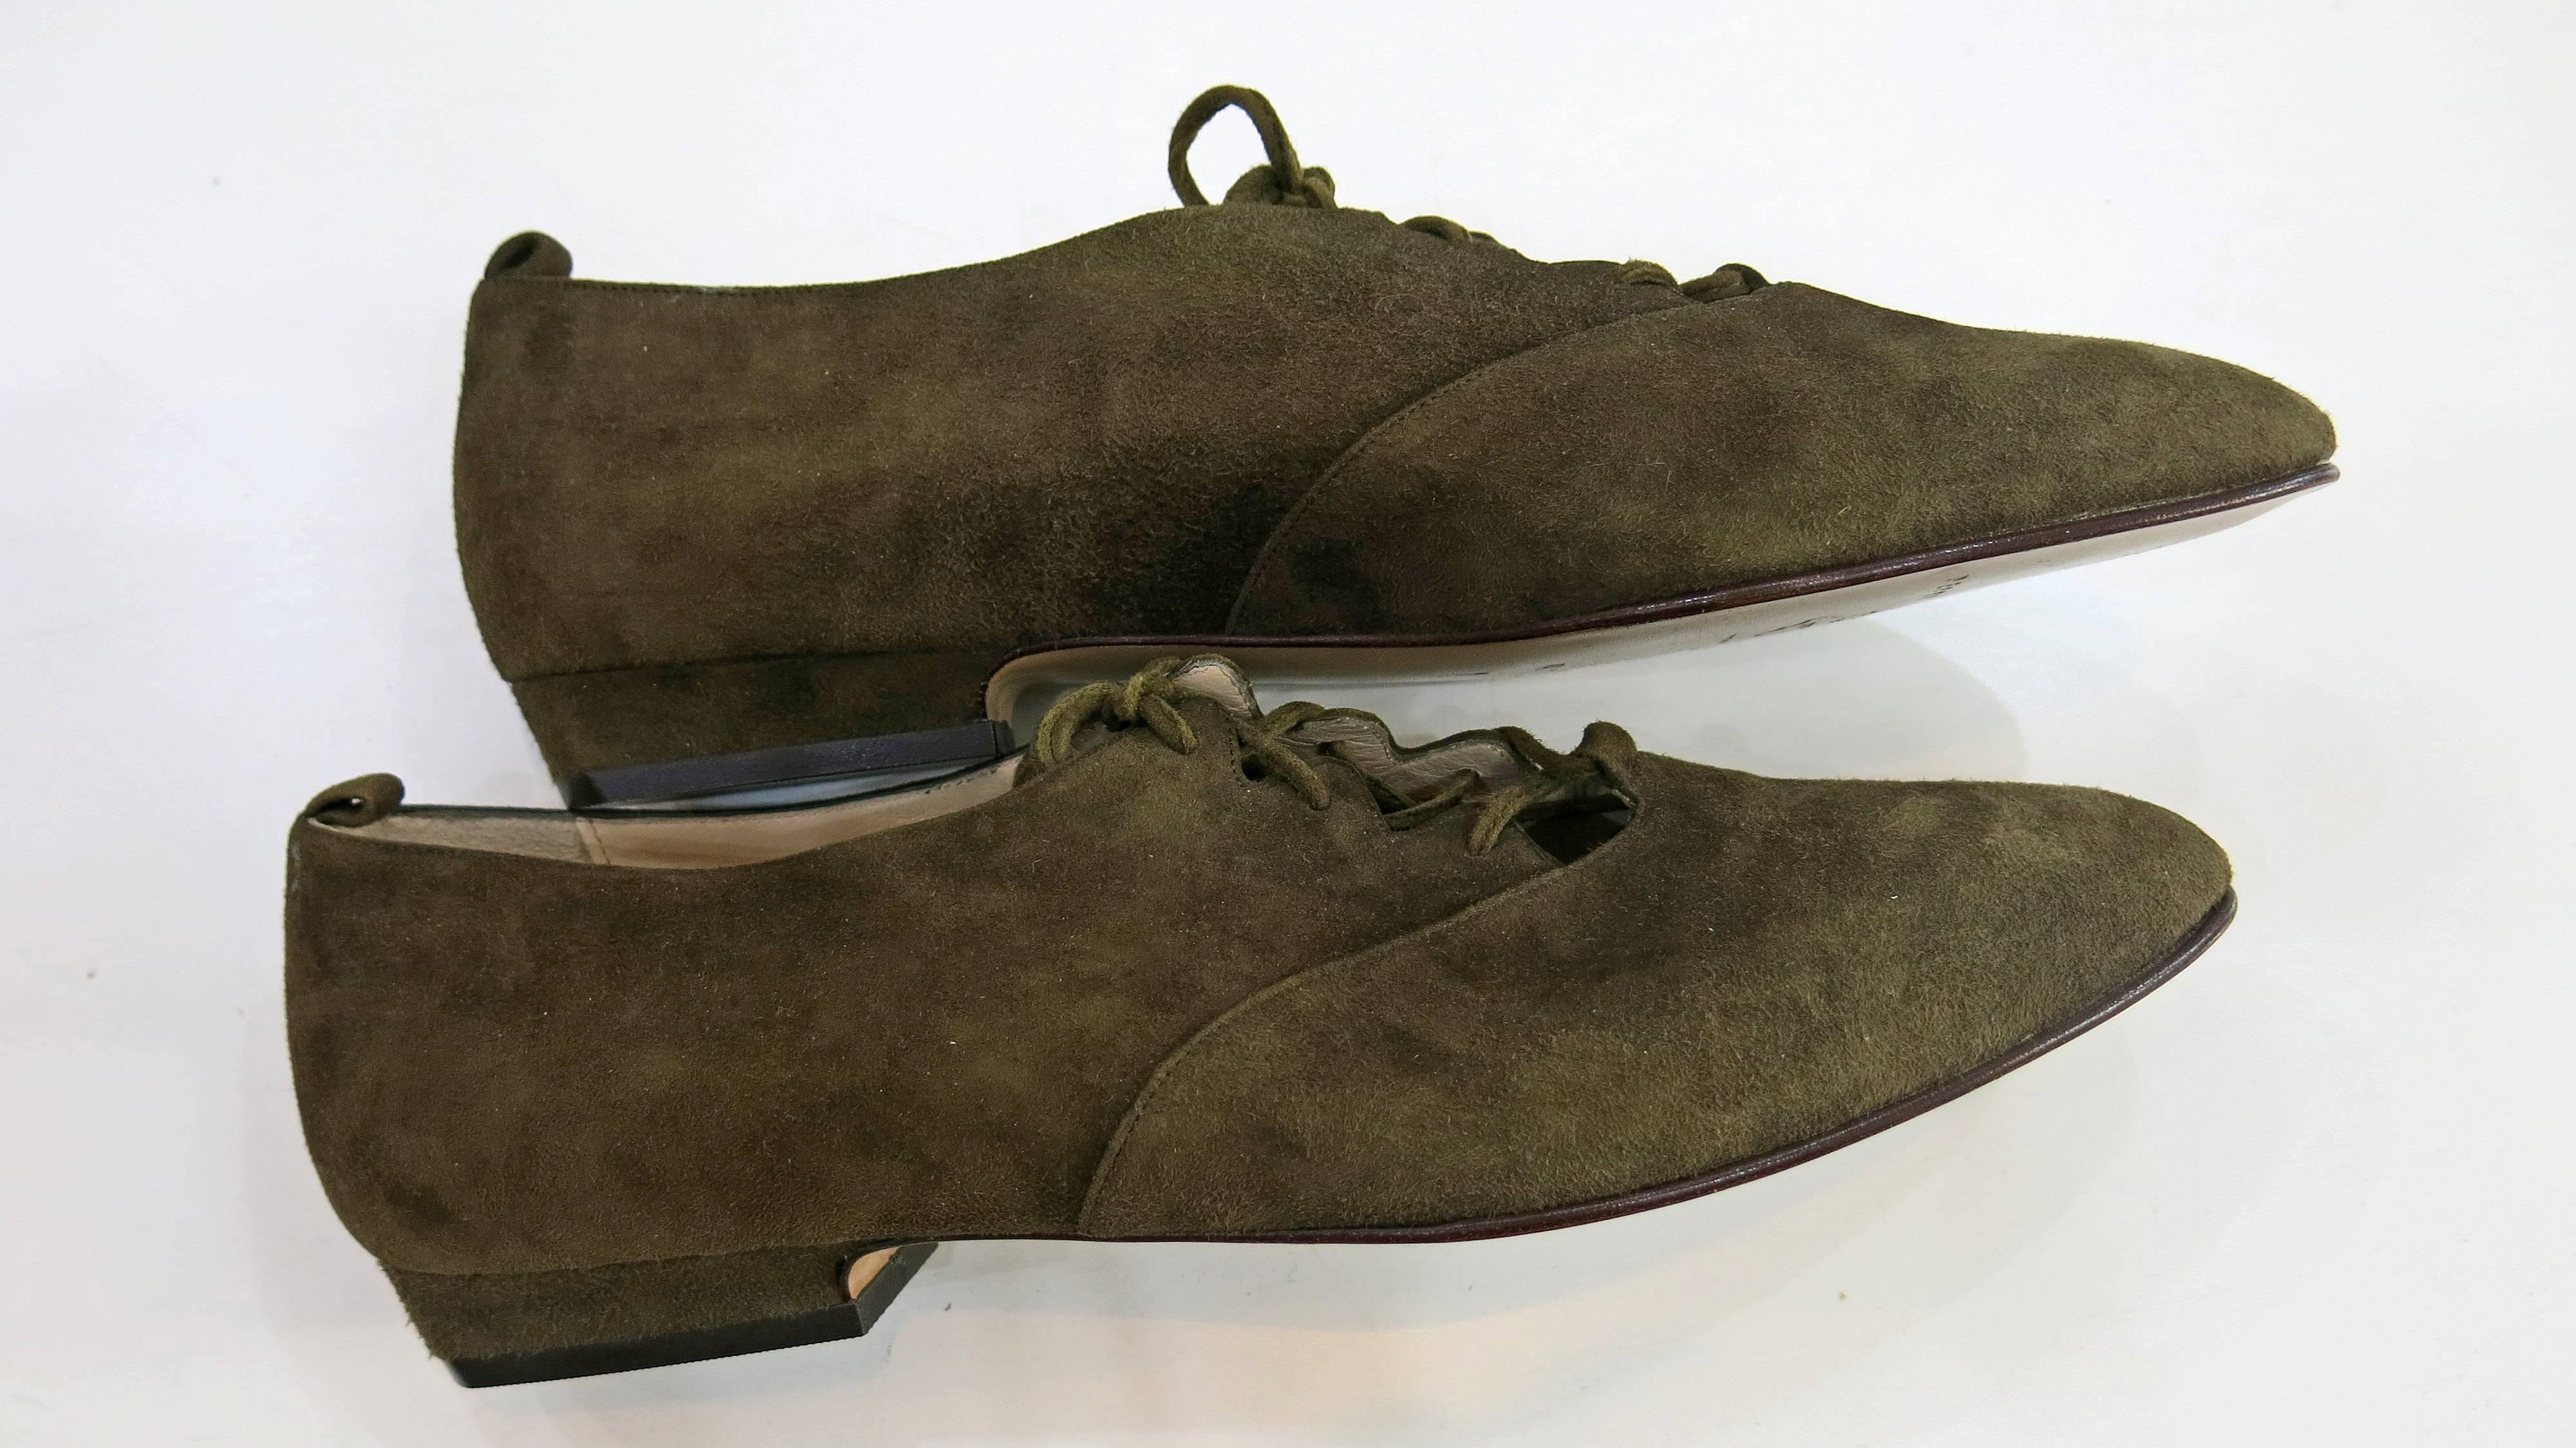 Dark green suede lace up flats with a slightly rounded pointed toe. Leather lining and sole. Made in Italy. Some slight wear on the outer shoe but the soles are in perfect condition and the shoes look unworn. With original box. Please see